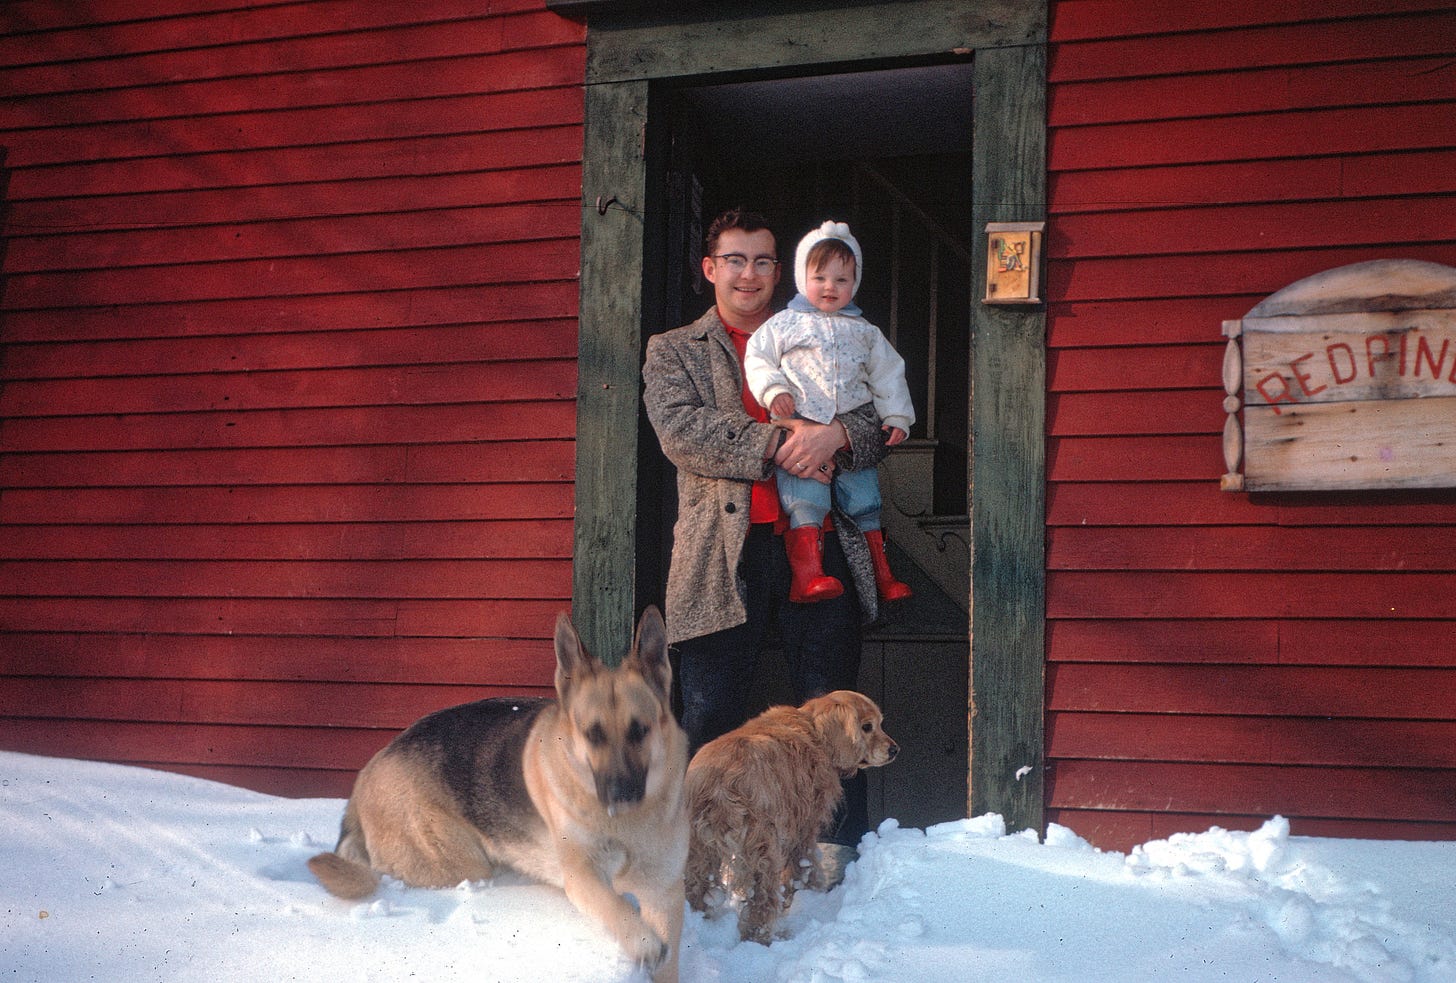 Man holding child in doorway with two dogs